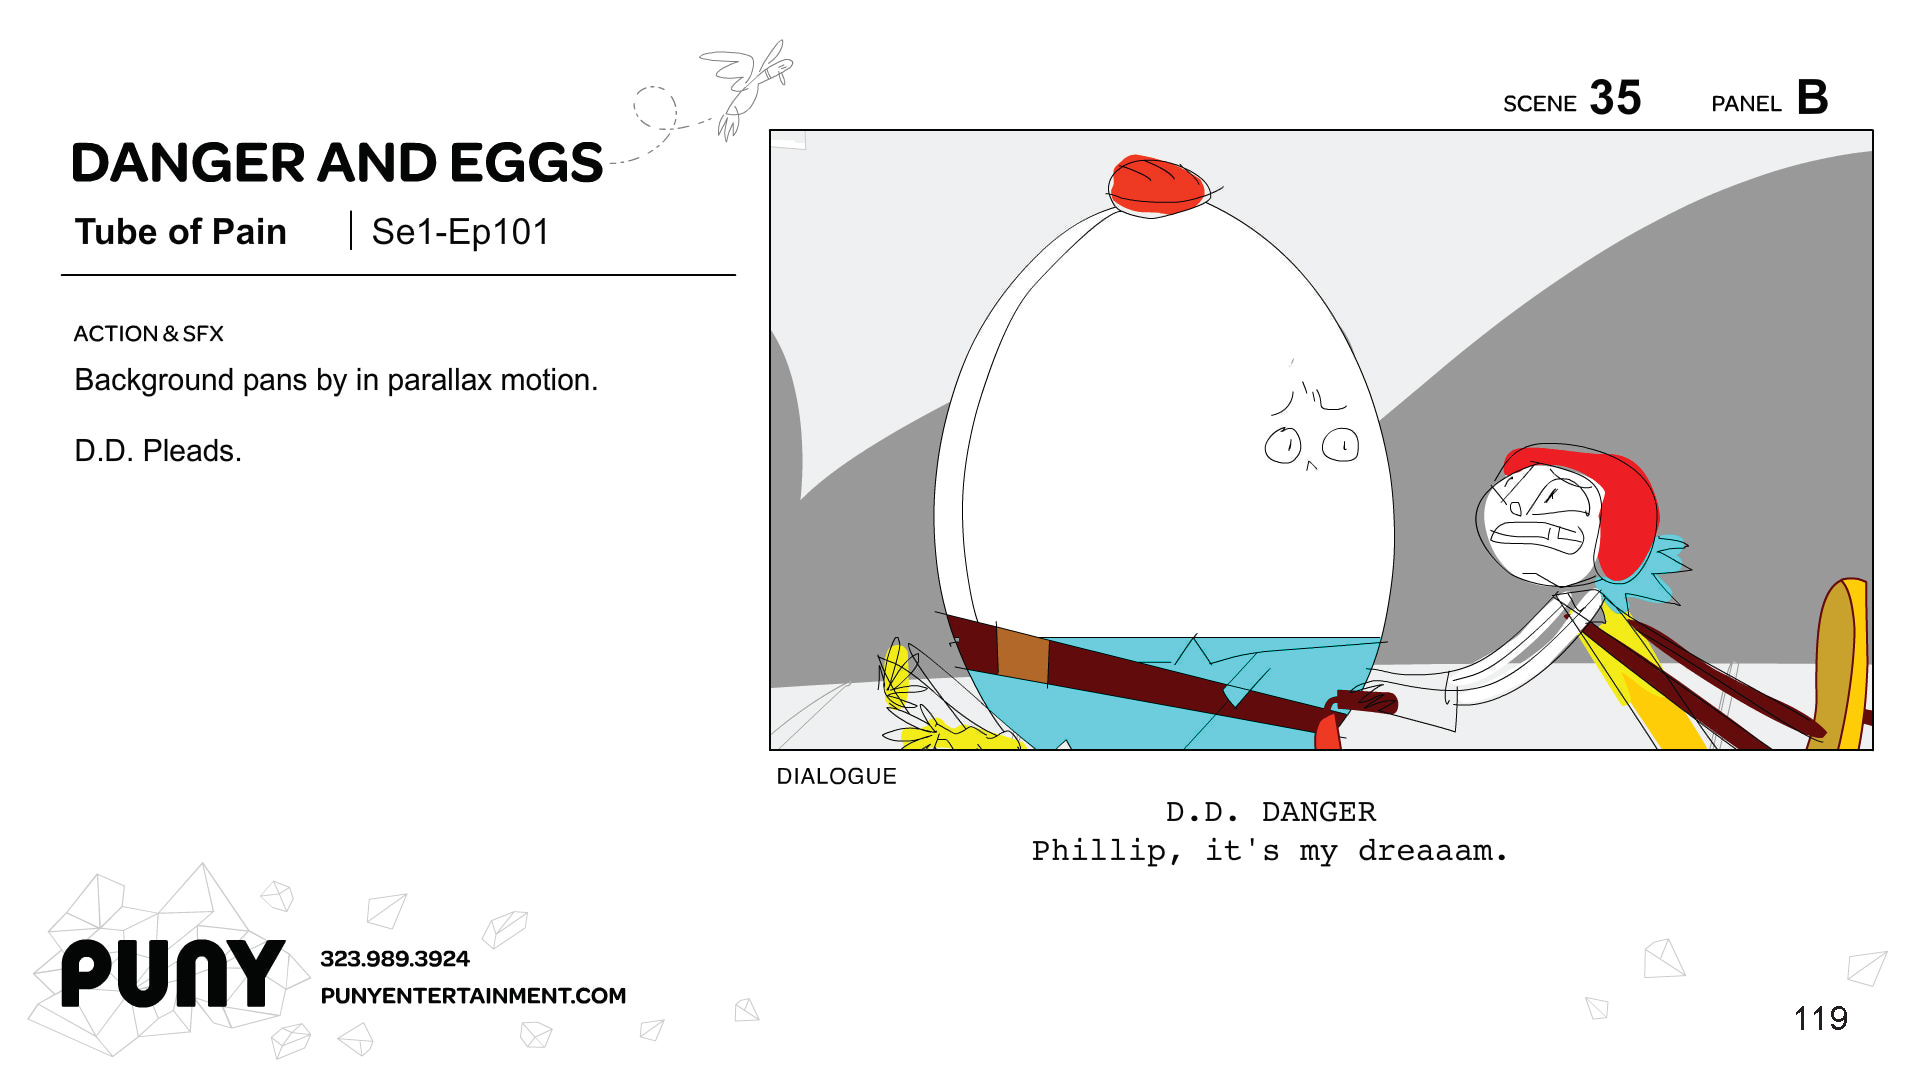 MikeOwens_STORYBOARDS_DangerAndEggs_Page_119.png